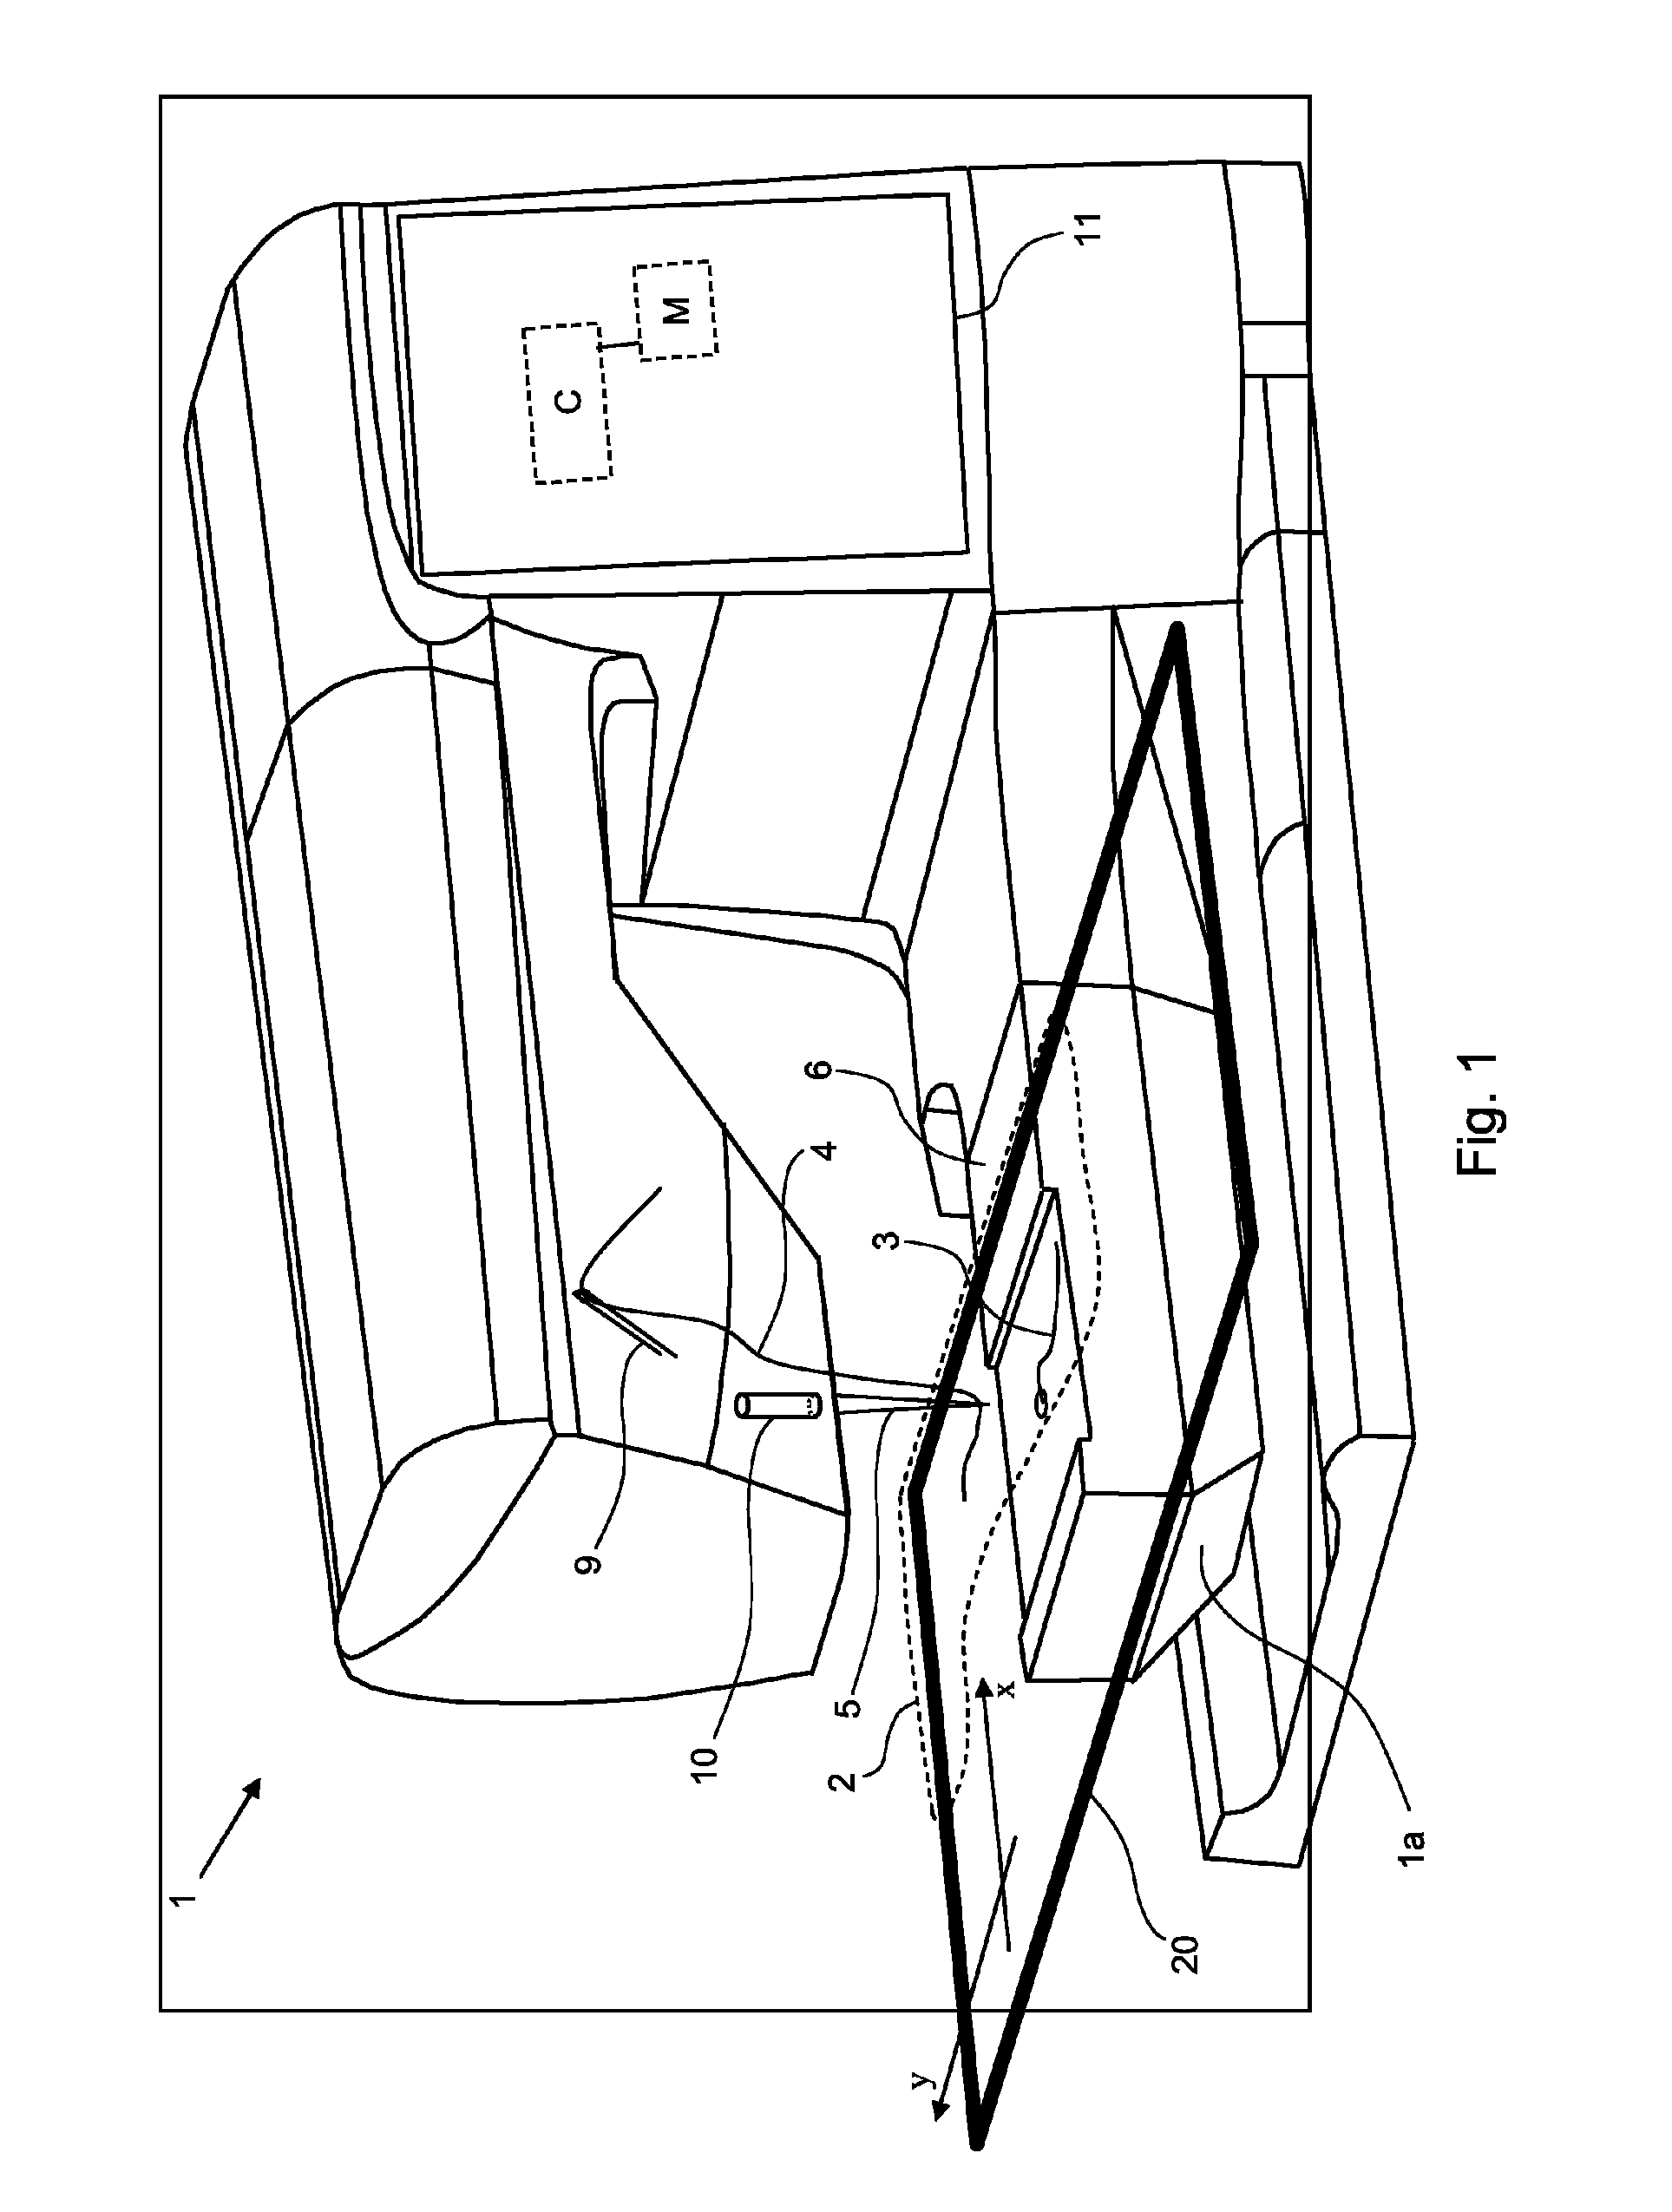 Sewing machine having a camera for forming images of a sewing area